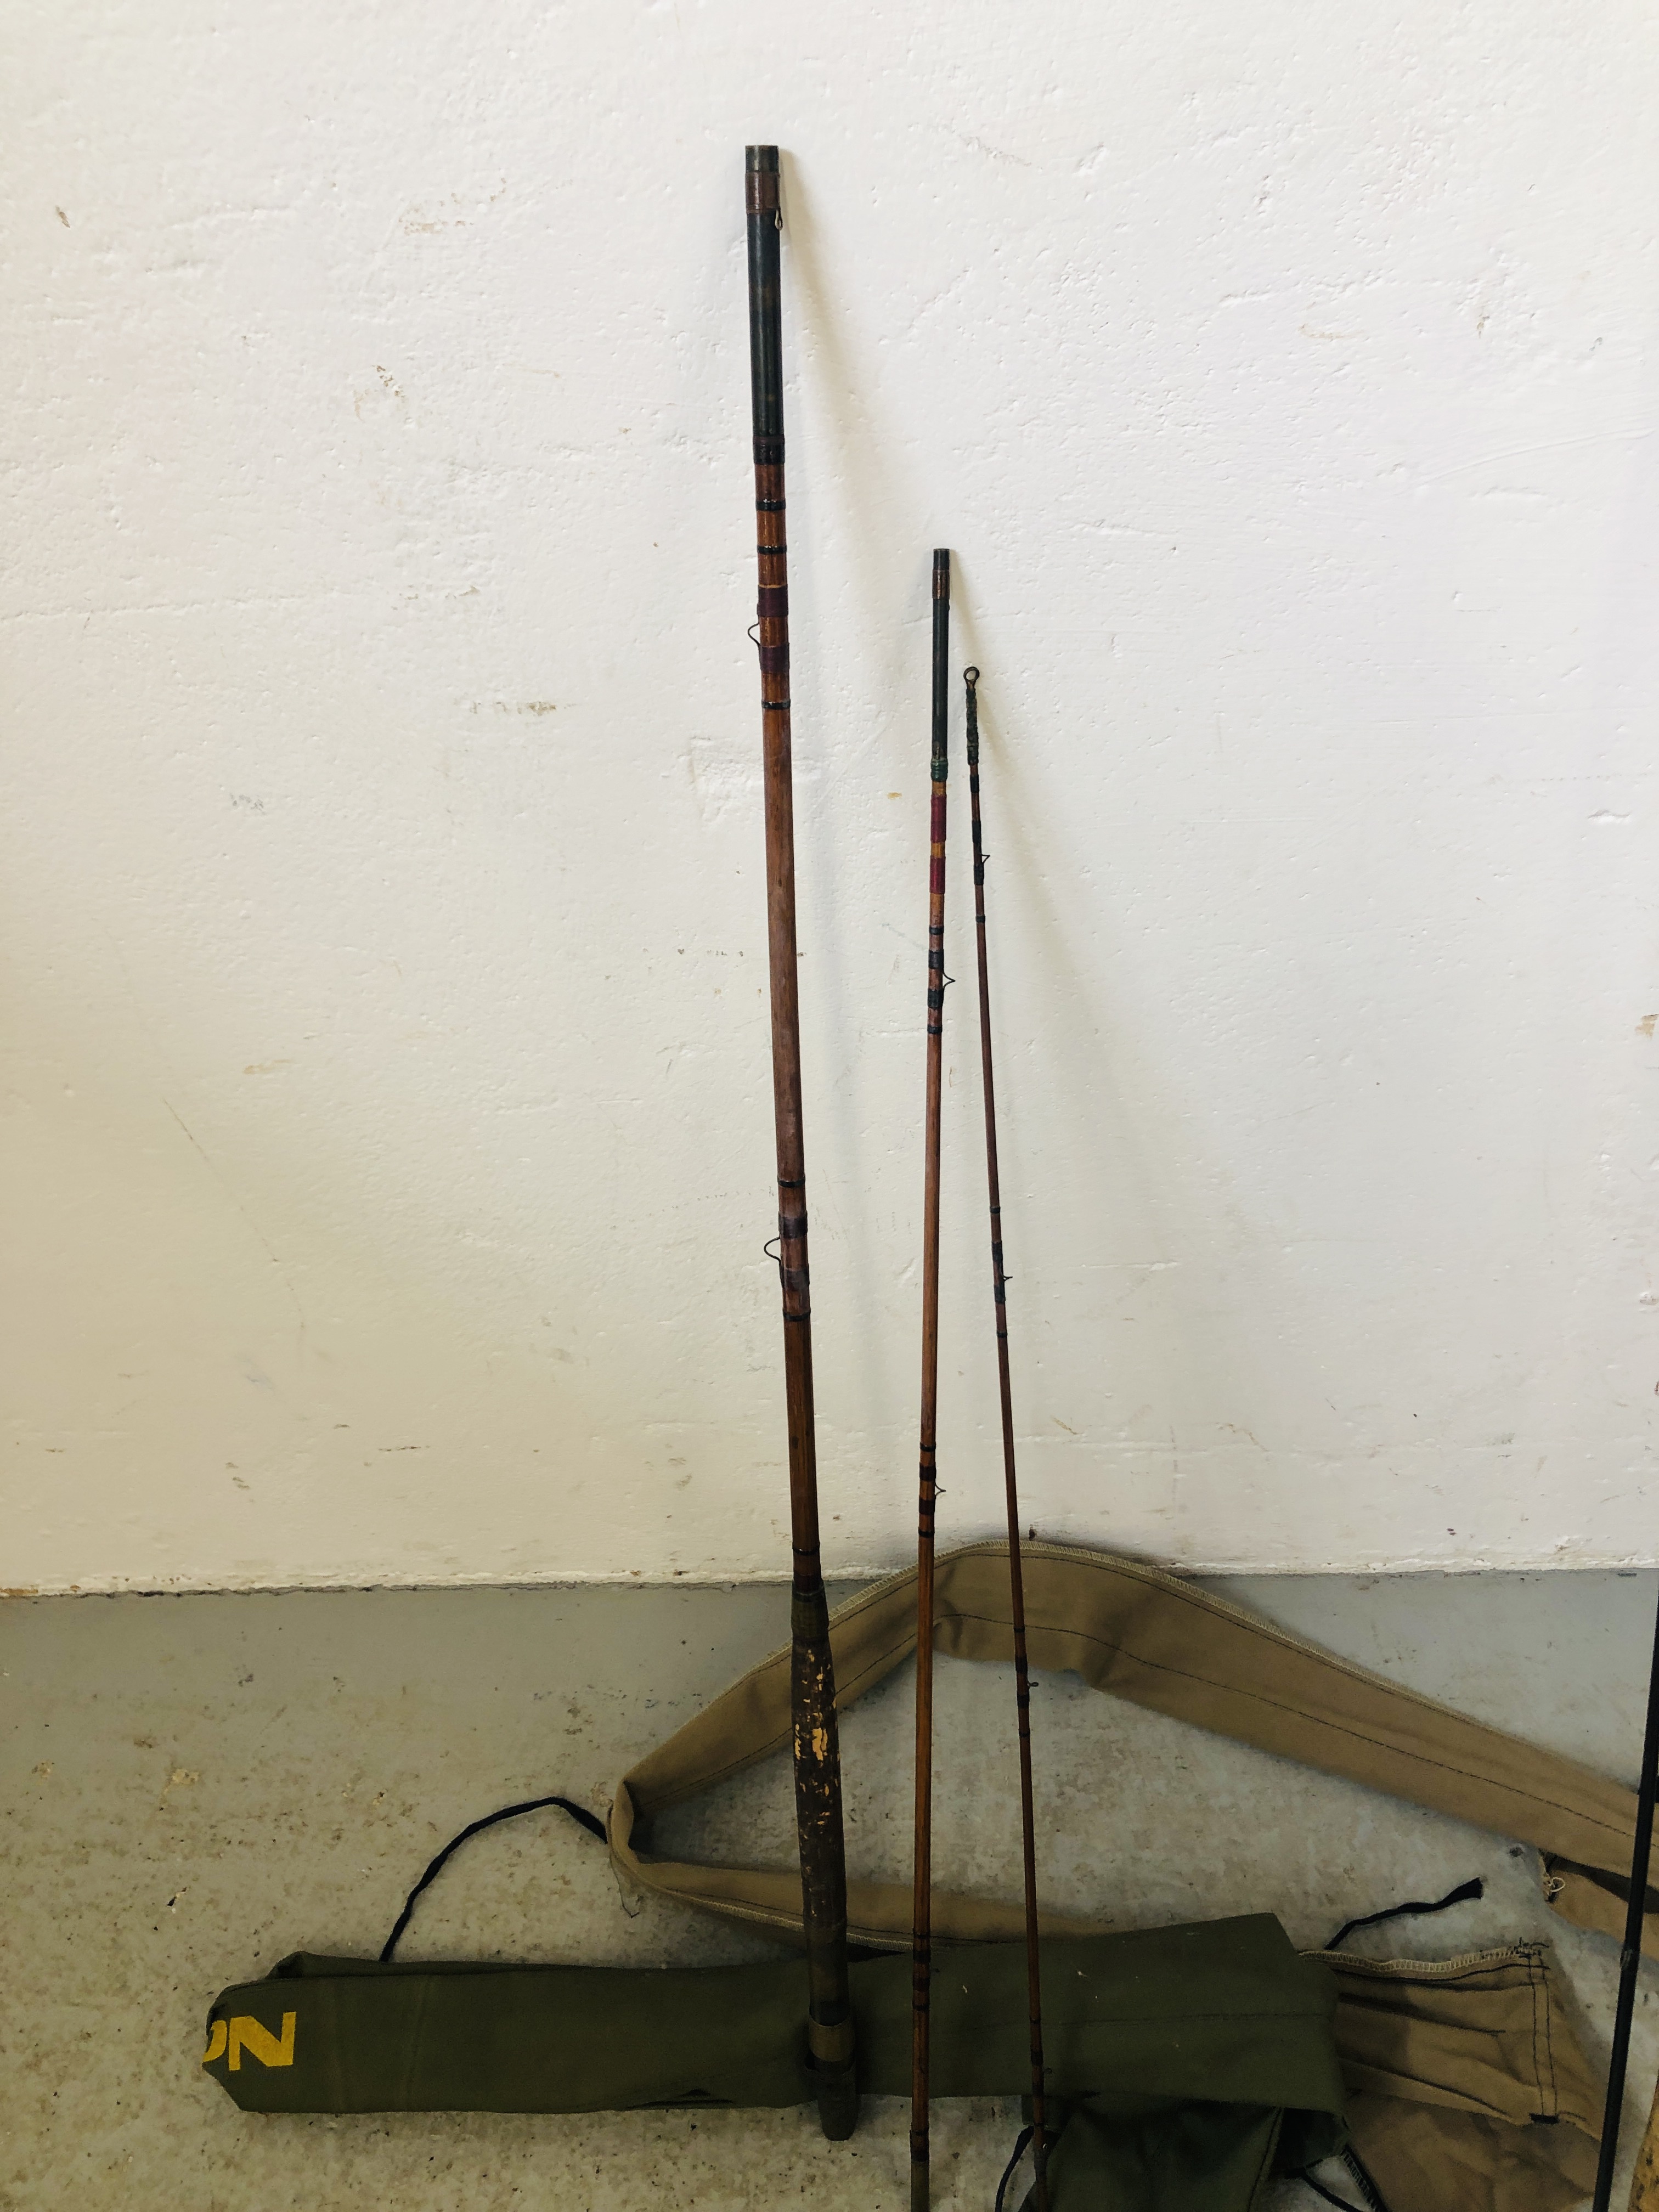 FOUR FLY FISHING RODS TO INCLUDE NORMARK THREE PIECE AND ONE OTHER TWO PIECE ROD AND THREE PIECE - Image 2 of 8